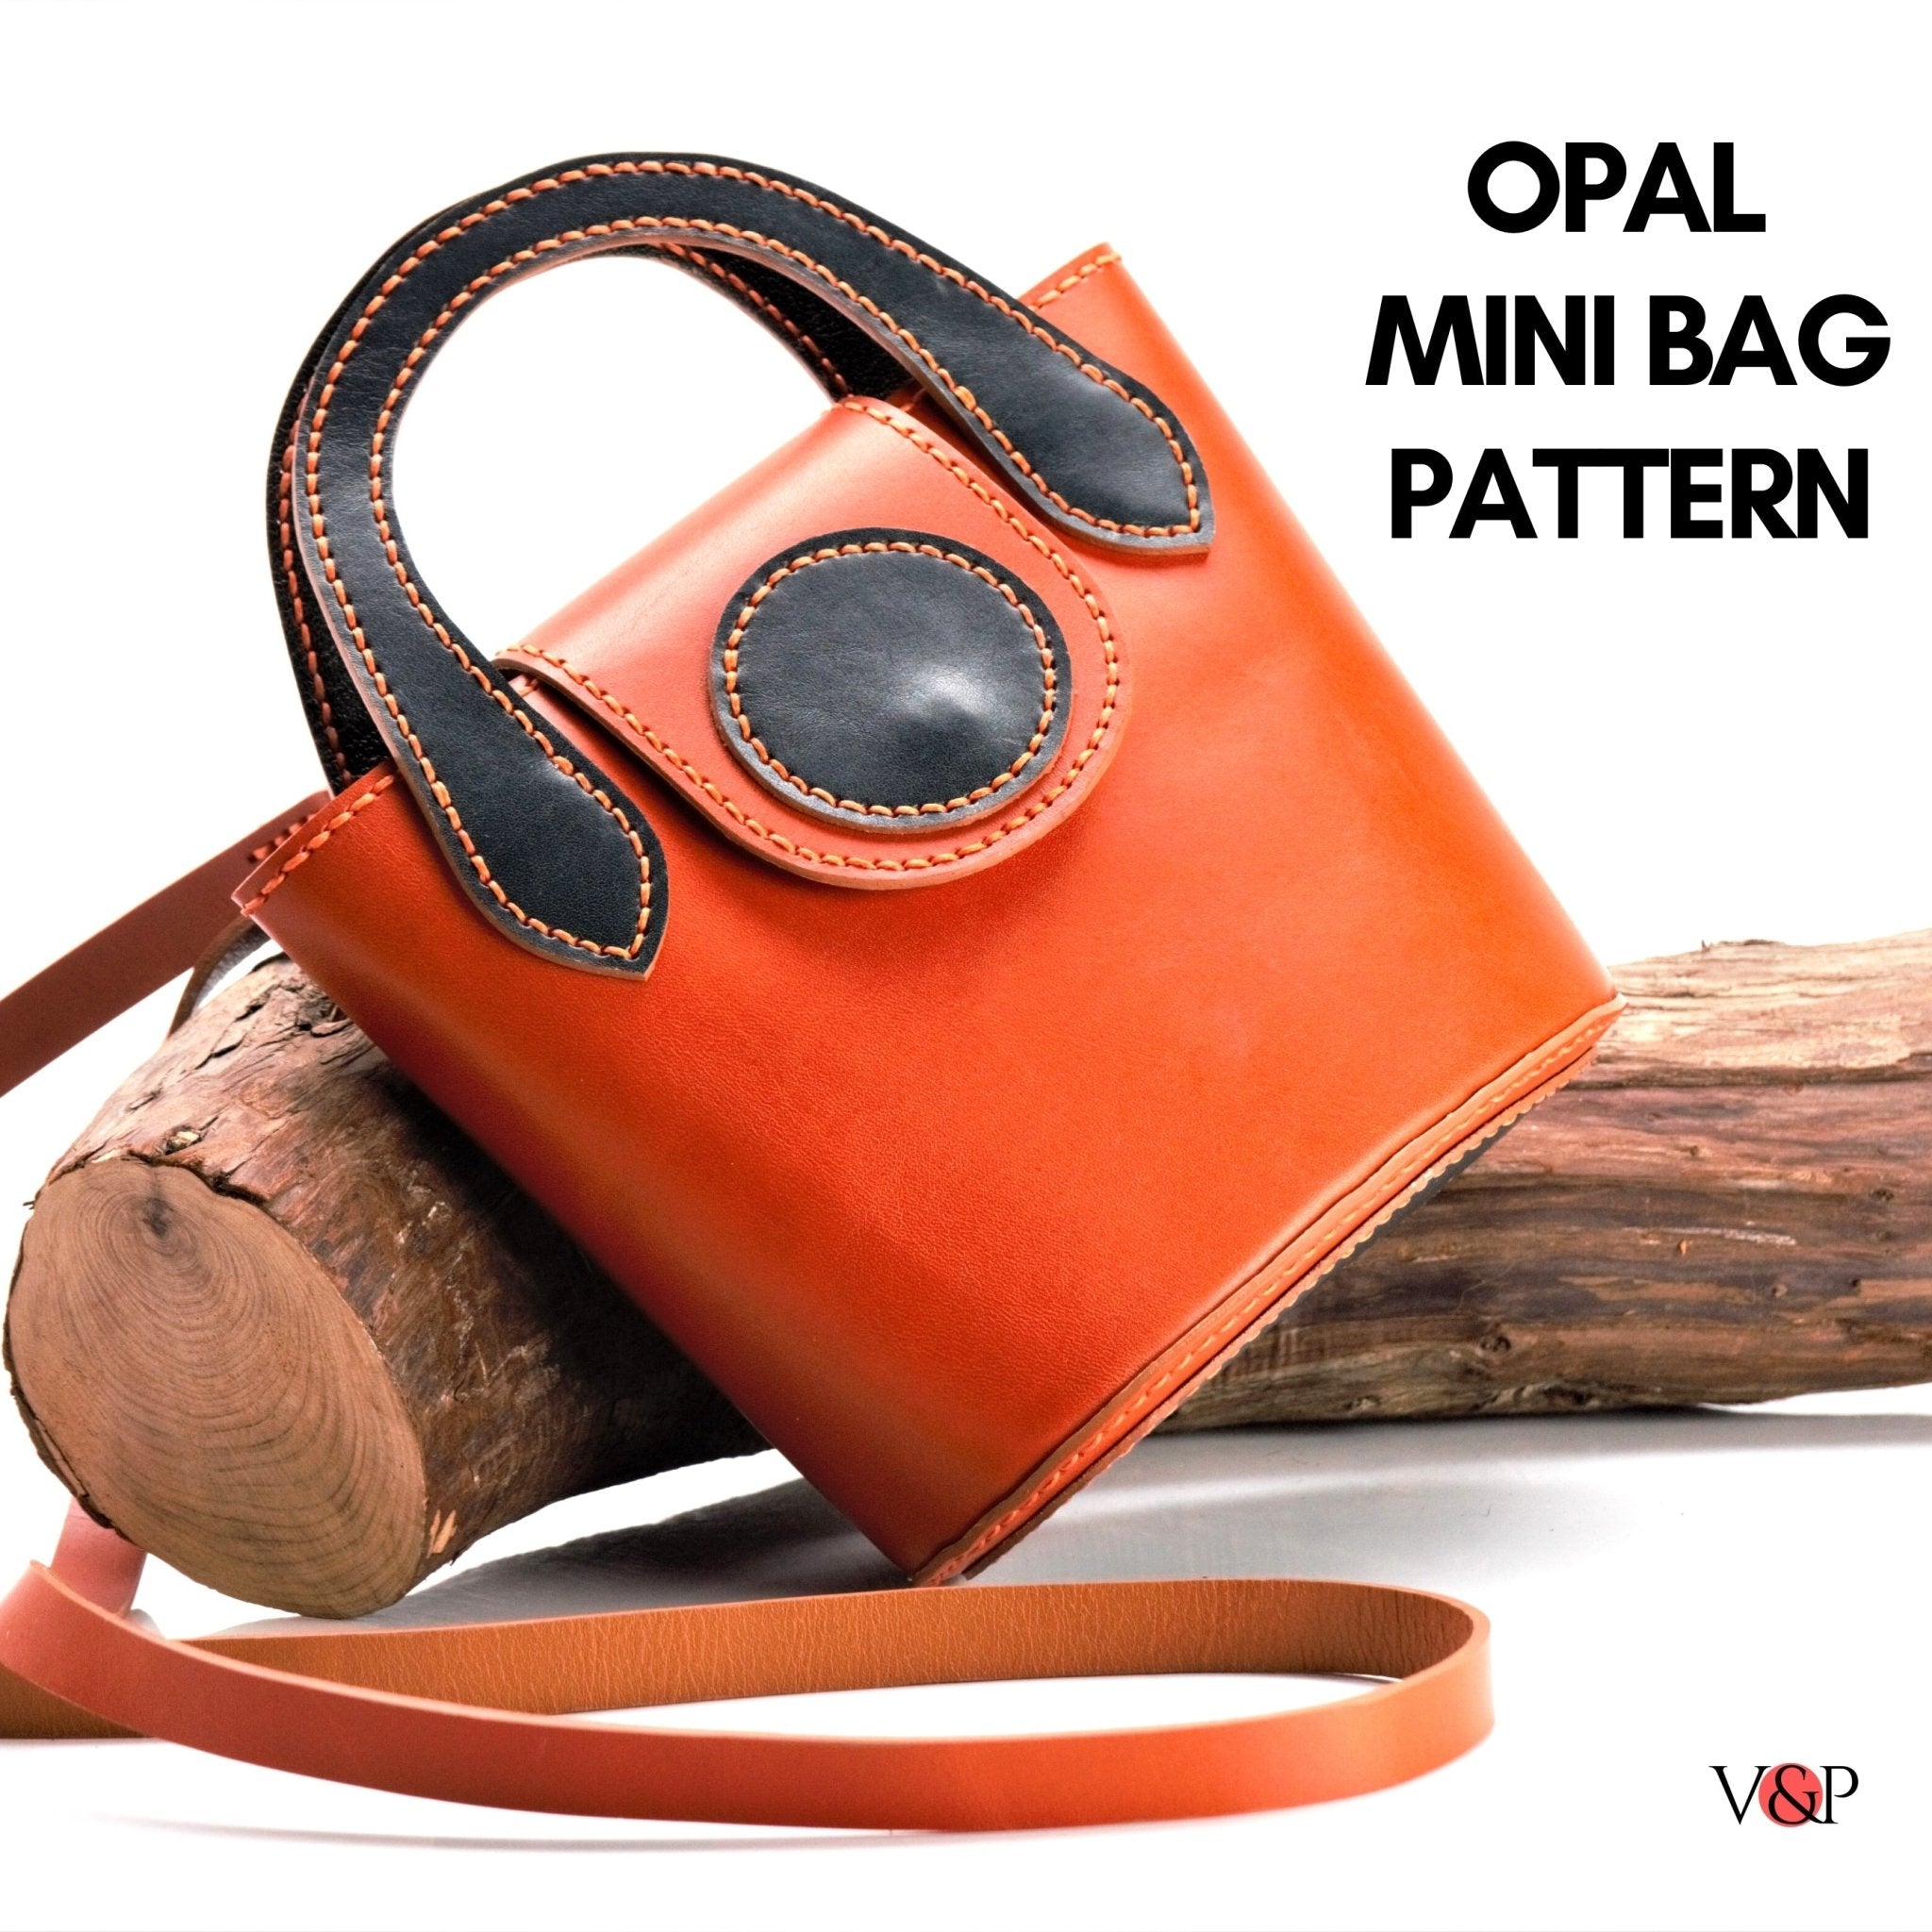 PDF Pattern for Opal Mini Bag, Instructional Video by Vasile and Pavel - Vasile and Pavel Leather Patterns